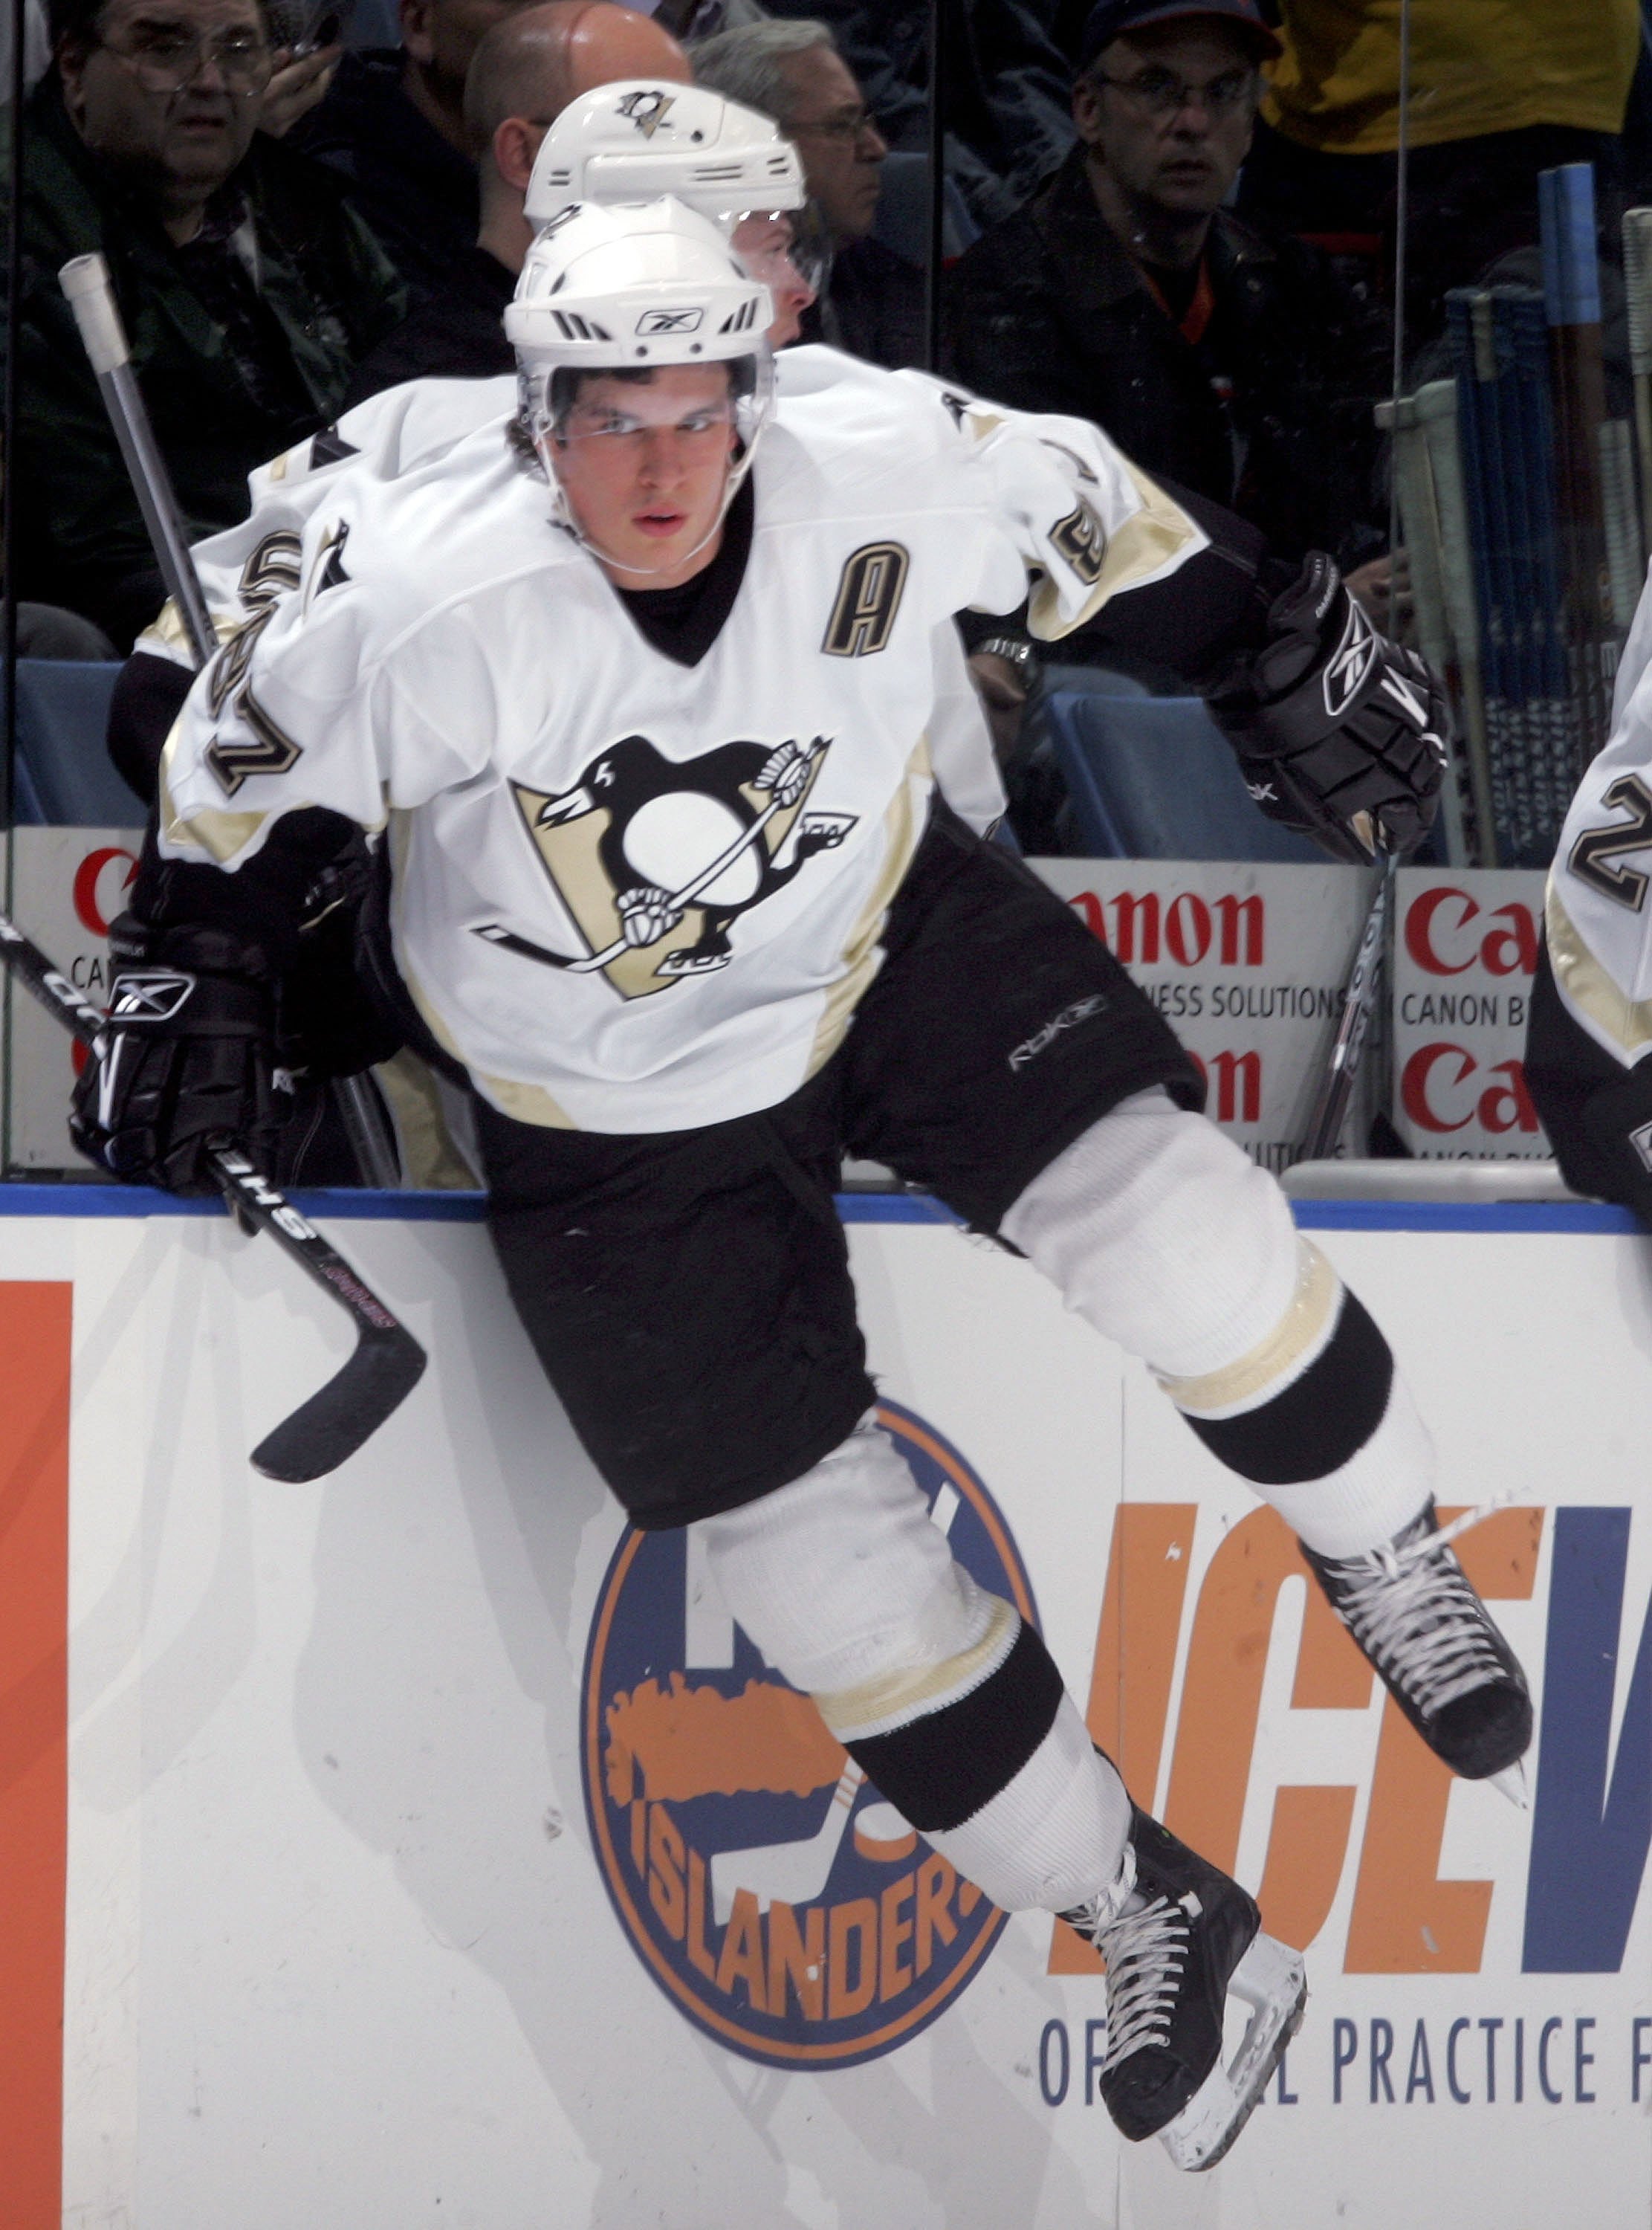 UNIONDALE, NY - MARCH 31:  Sidney Crosby #87 of the Pittsburgh Penguins jumps onto the ice for a shift against the New York Islanders during their game at the Nassau Coliseum on March 31, 2006 in Uniondale, New York. The Pens defeated the Isles 4-0.  (Pho